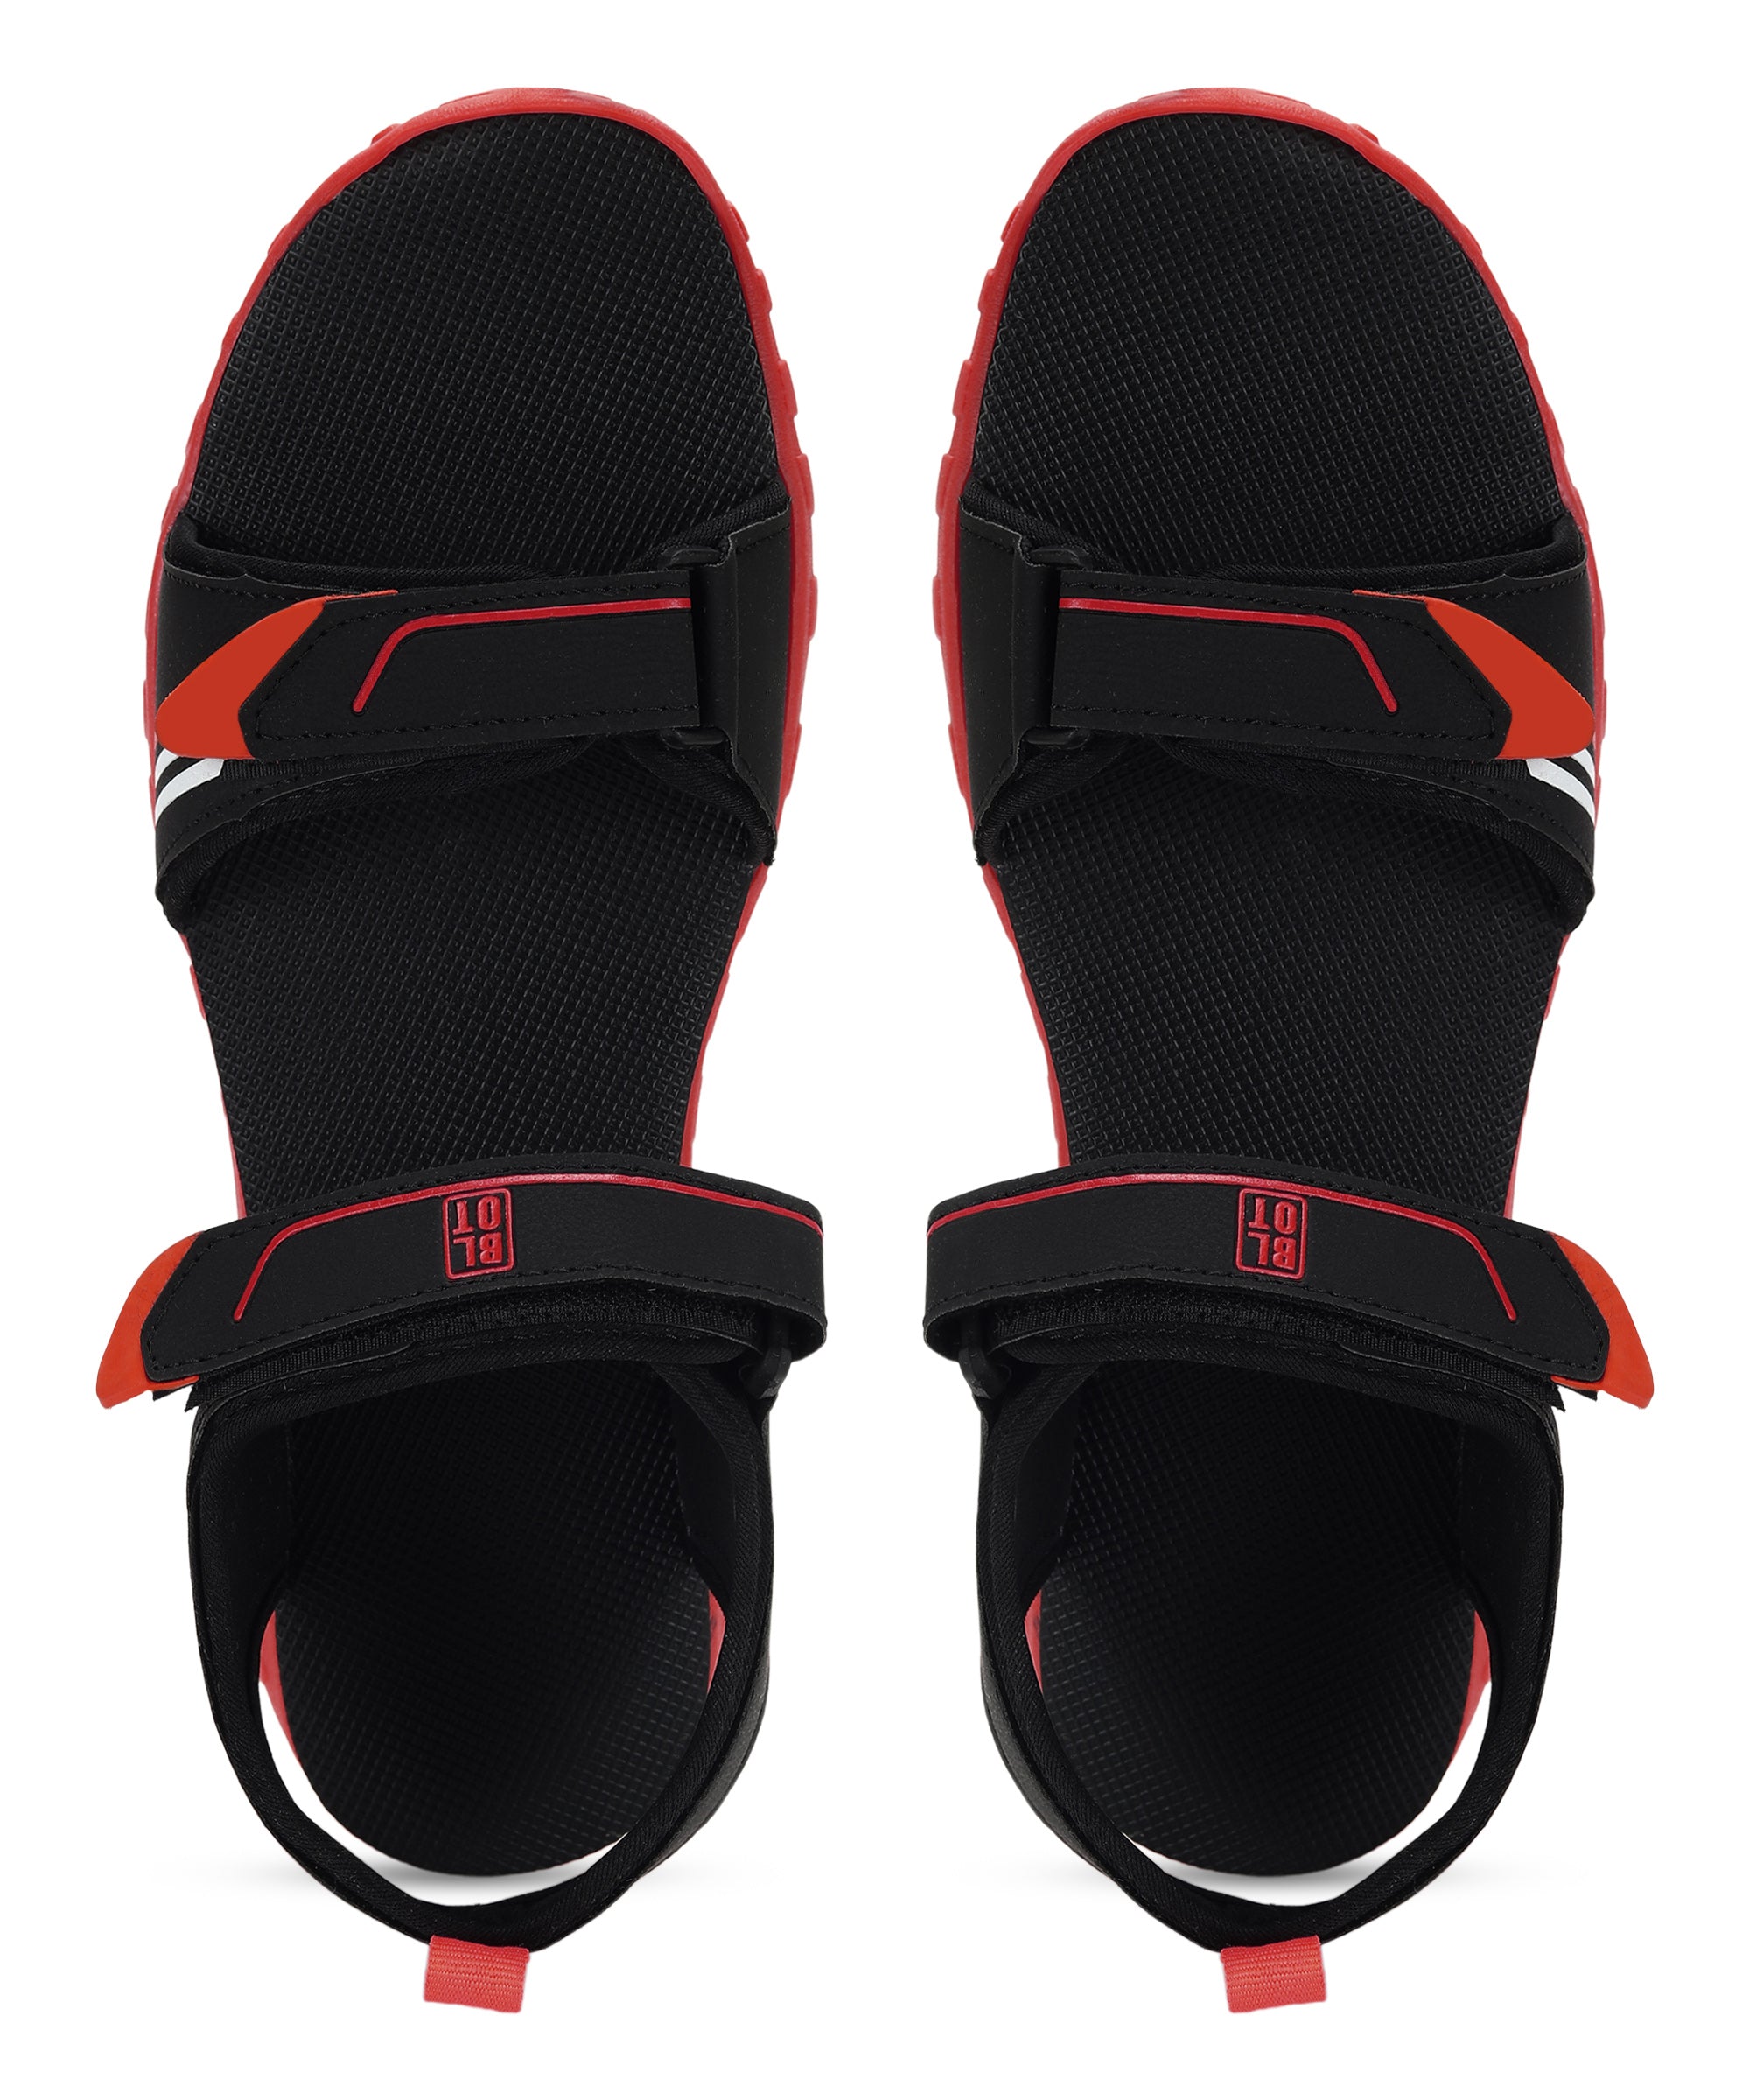 Paragon Blot K1421G Men Stylish Sandals | Comfortable Sandals for Daily Outdoor Use | Casual Formal Sandals with Cushioned Soles